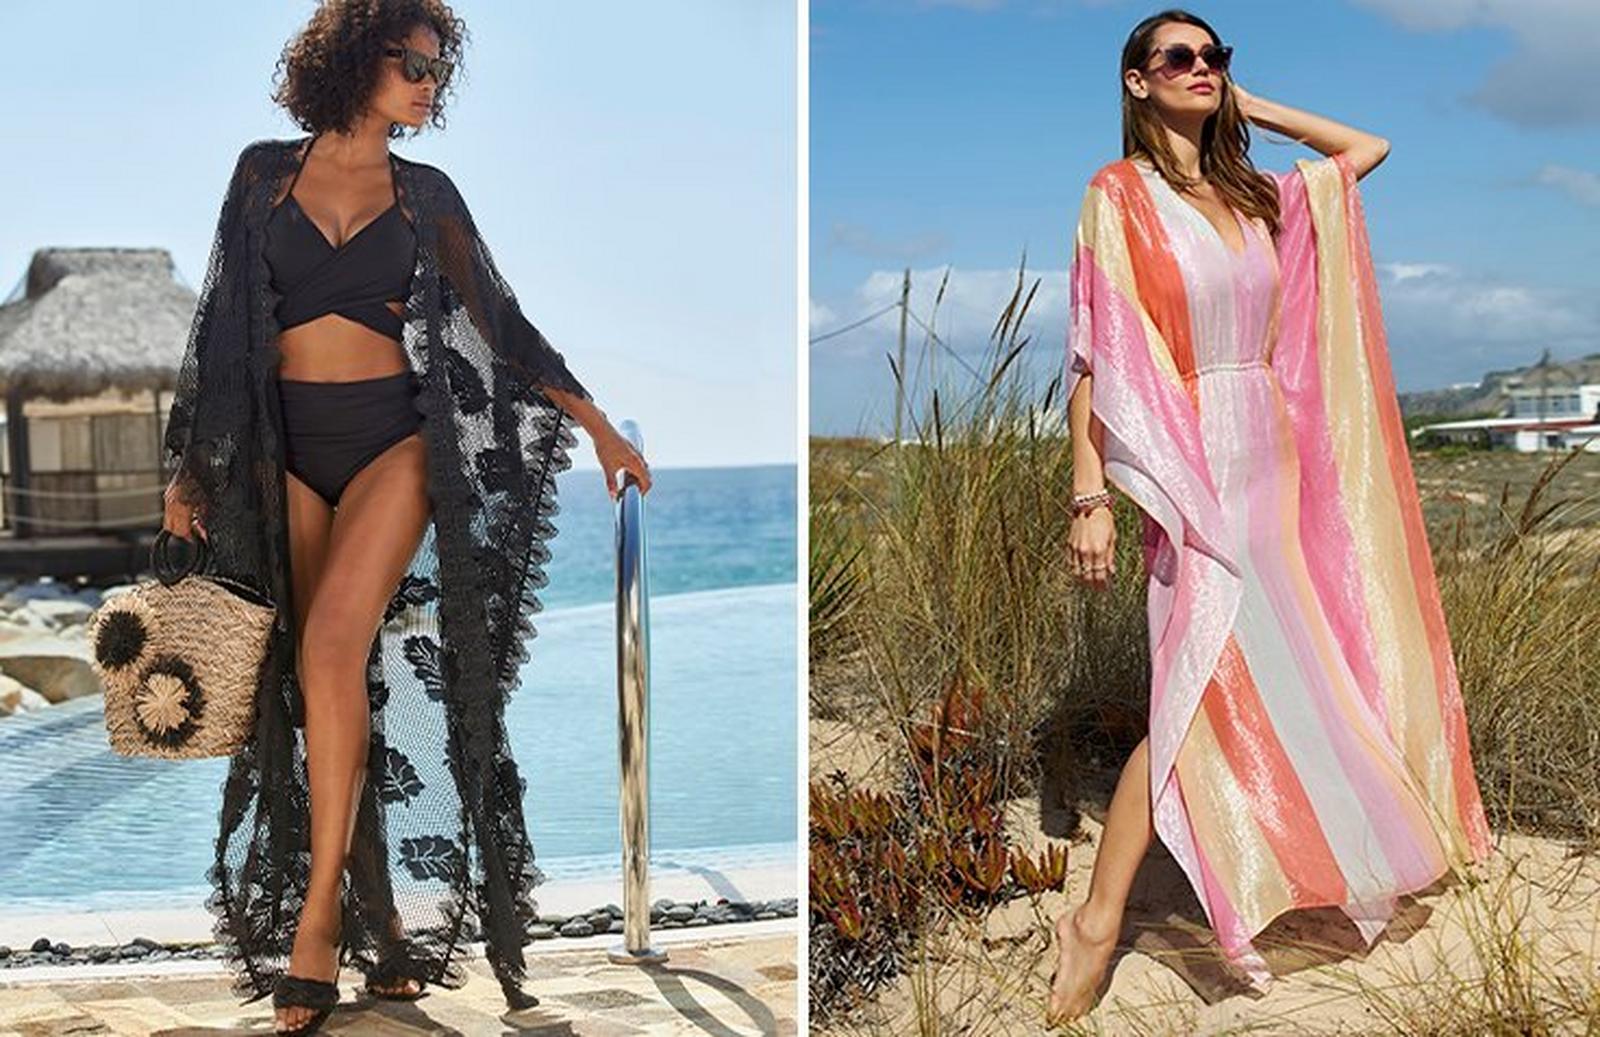 left model wearing a black lace duster cover-up, black bikini, sunglasses, black leather braided sandals, and straw bag. right model wearing a multicolored shimmer stripe caftan dress and sunglasses.